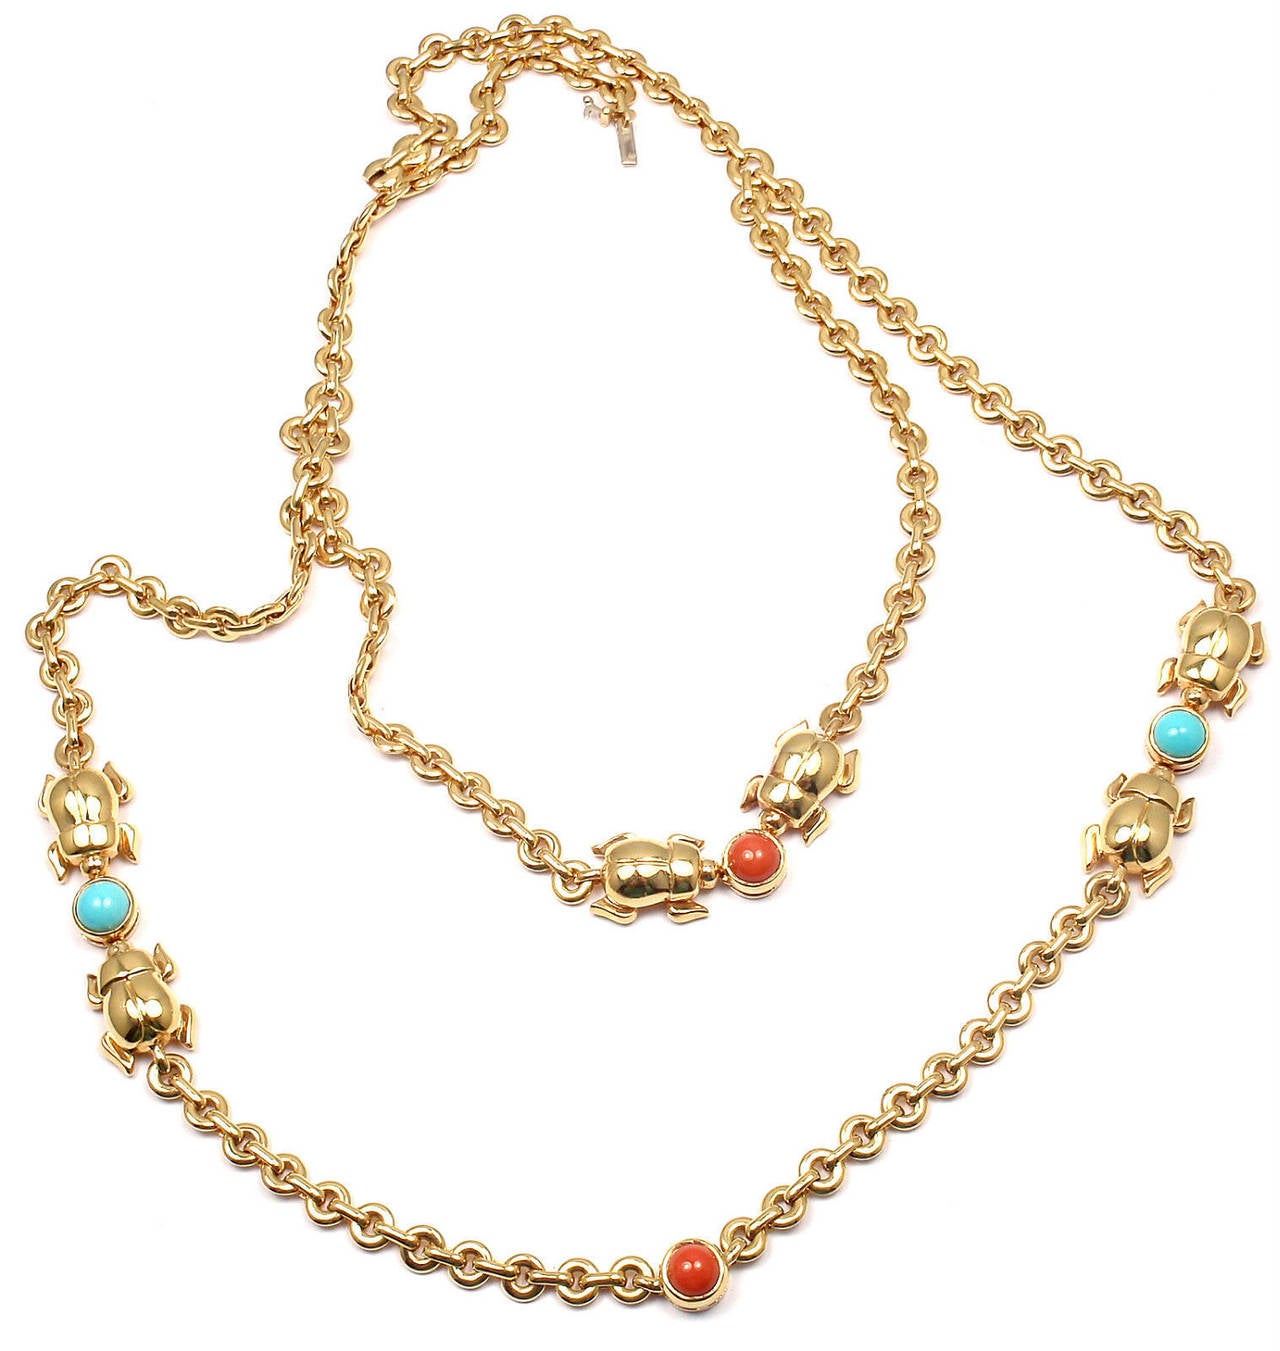 18k Yellow Gold Turquoise and Coral Scarab Link Necklace by Cartier.
With 2 round corals
2 round turquoise
This necklace comes with an original Cartier box.

Details:
Length: first row 15